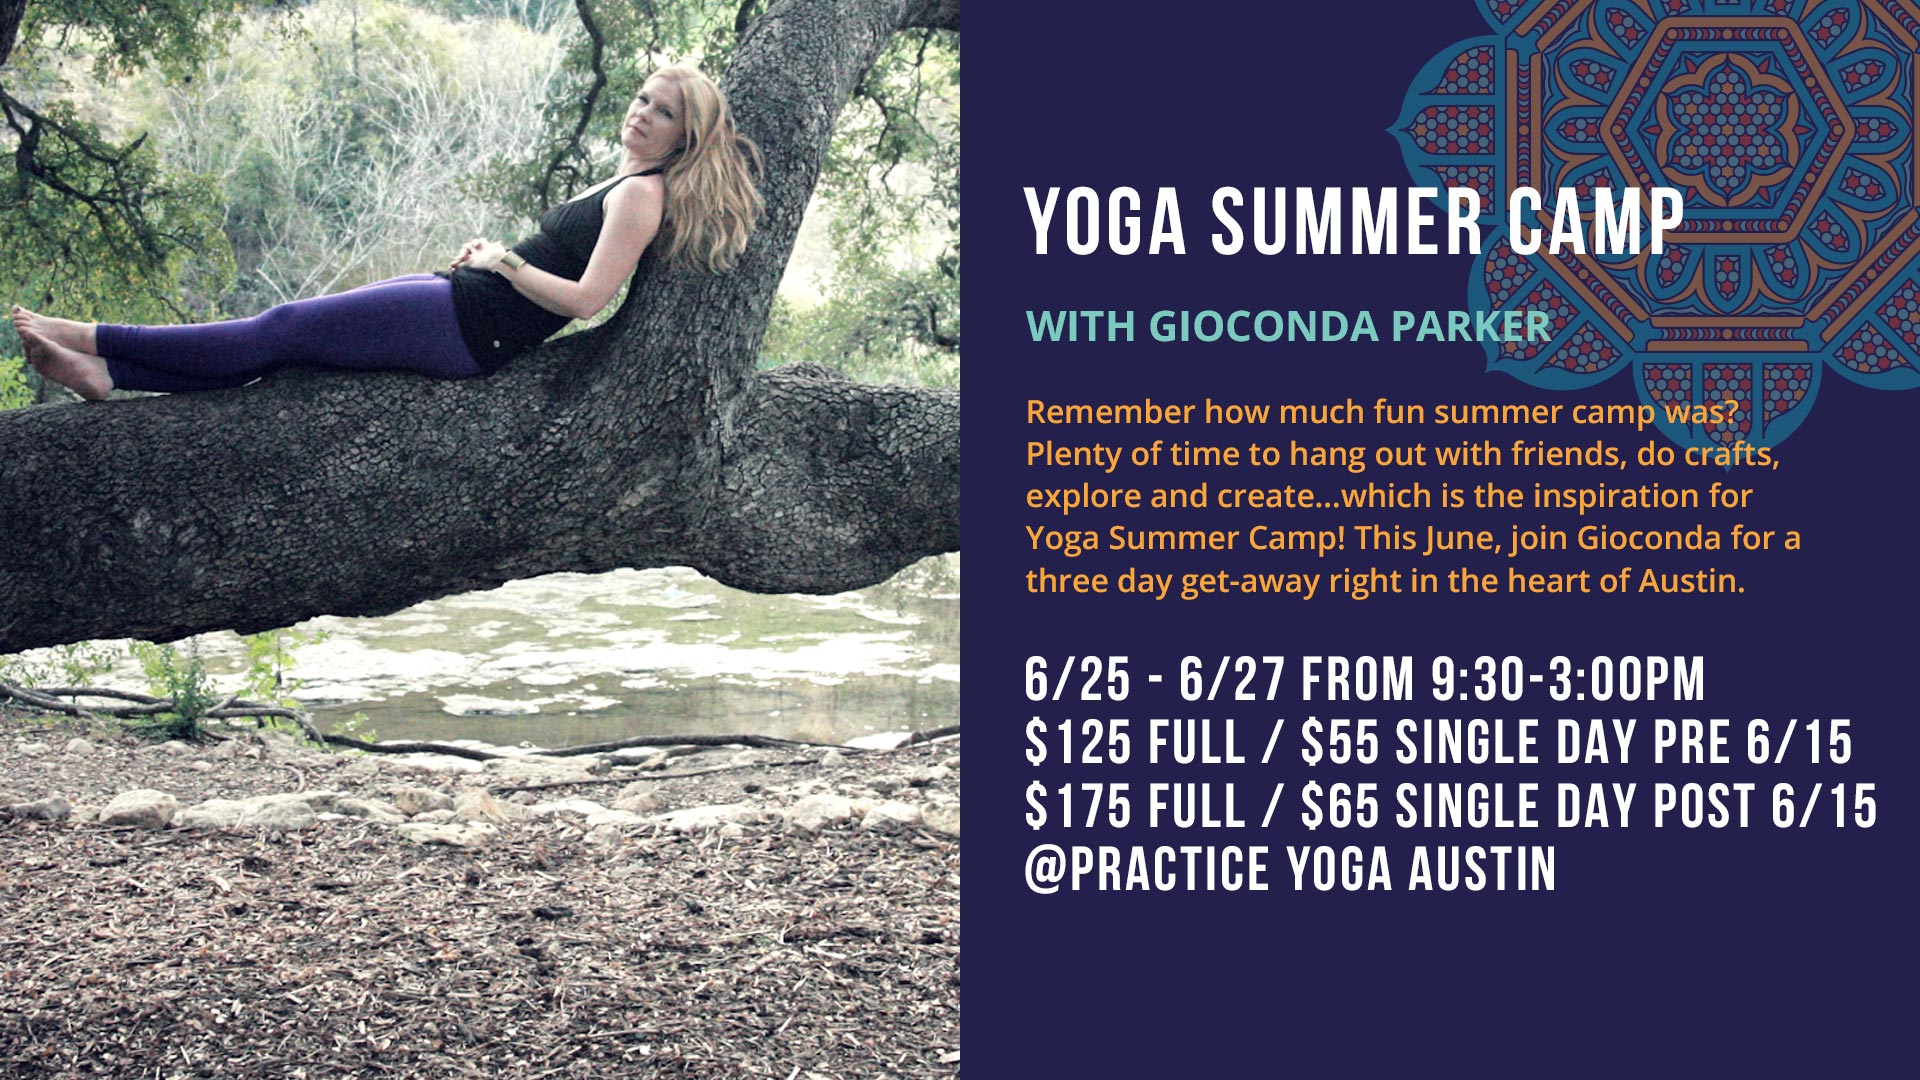 Yoga Summer Camp with Gioconda Parker and Practice Yoga Austin